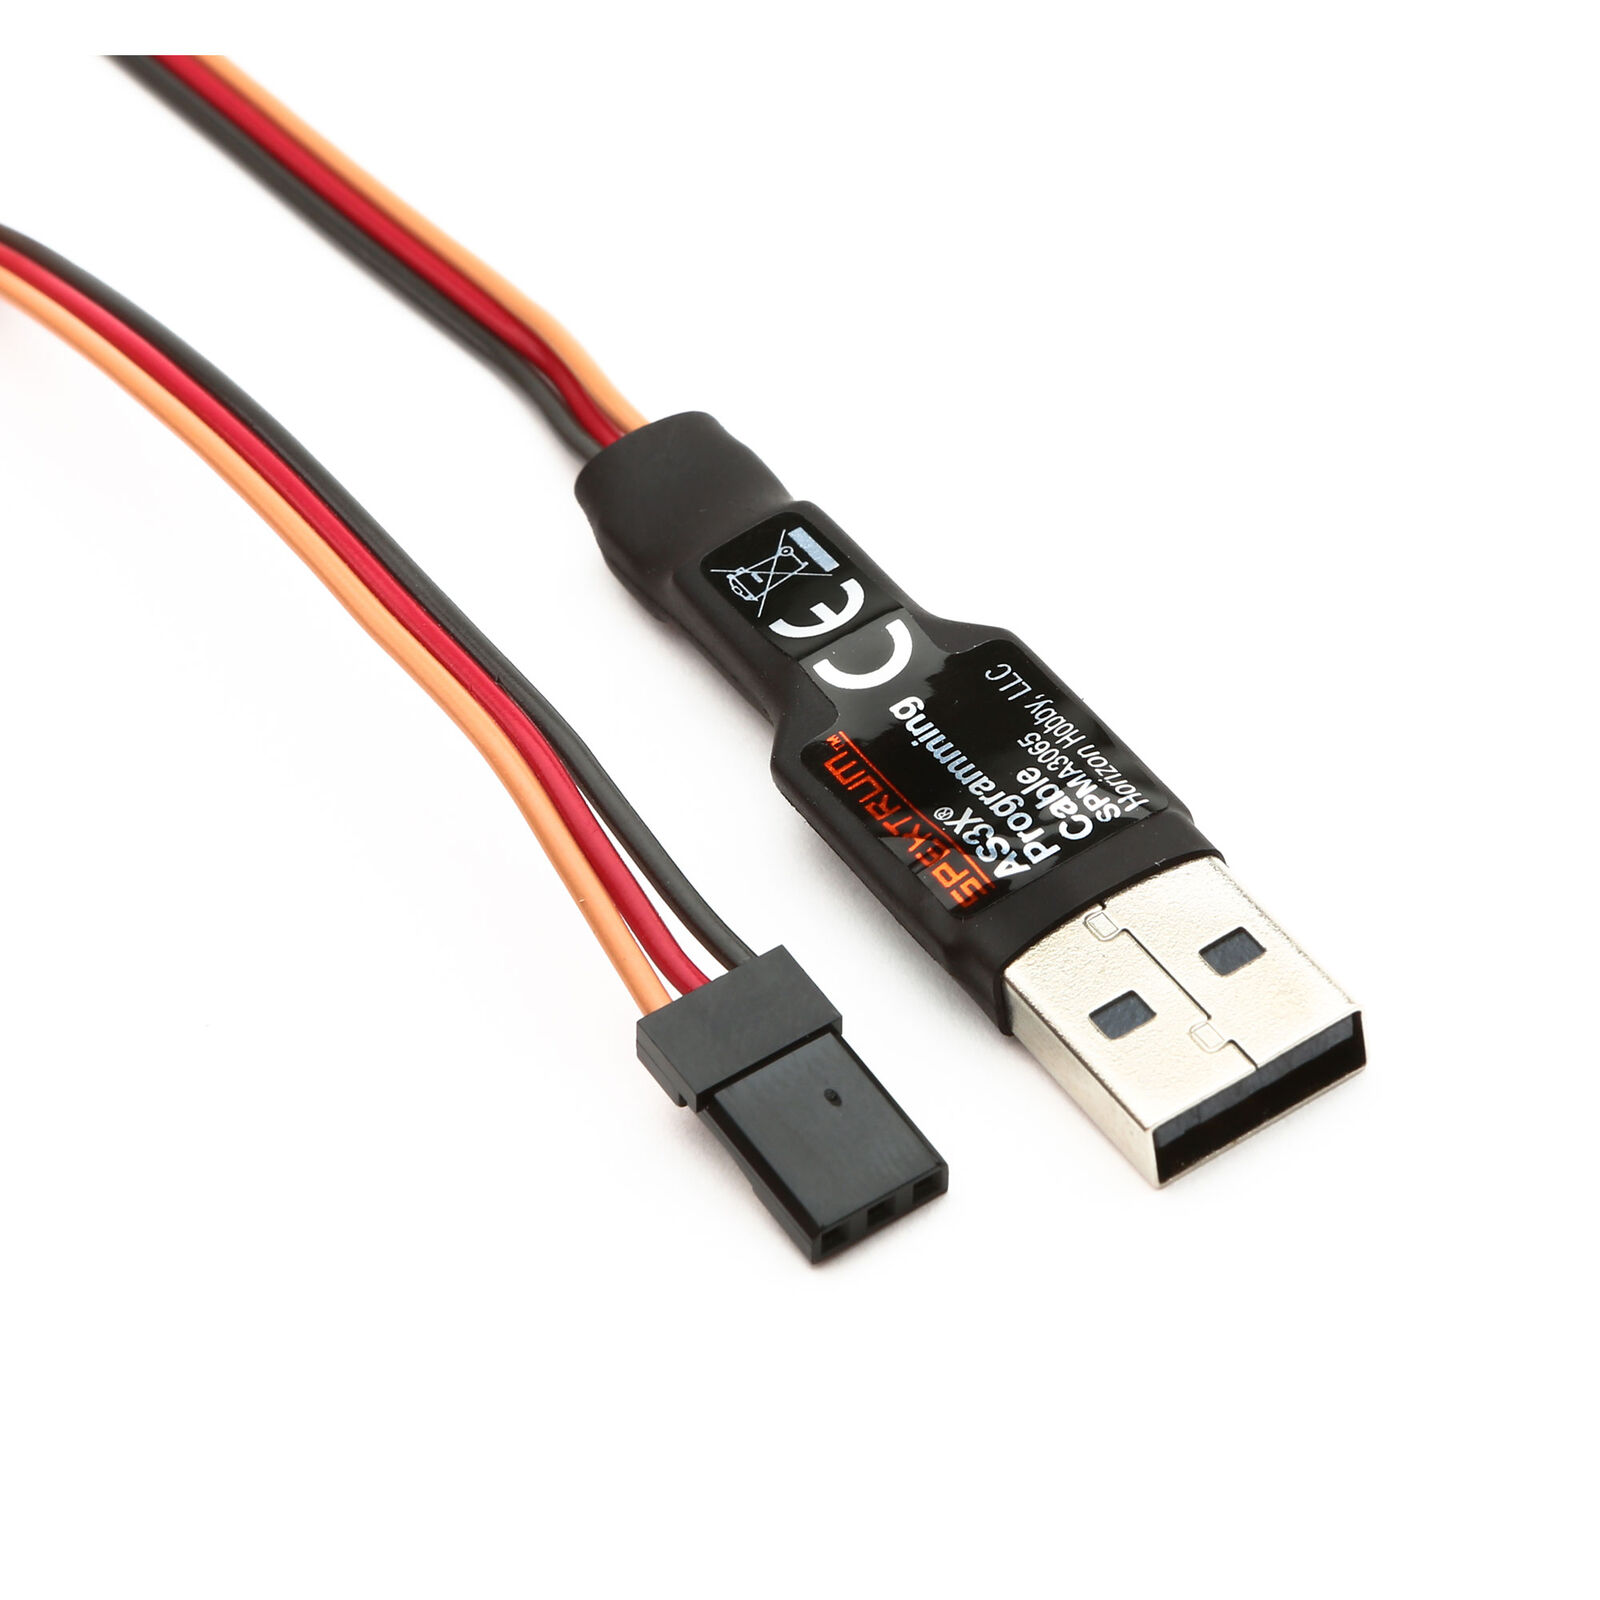 Transmitter/Receiver Cable: USB Interface